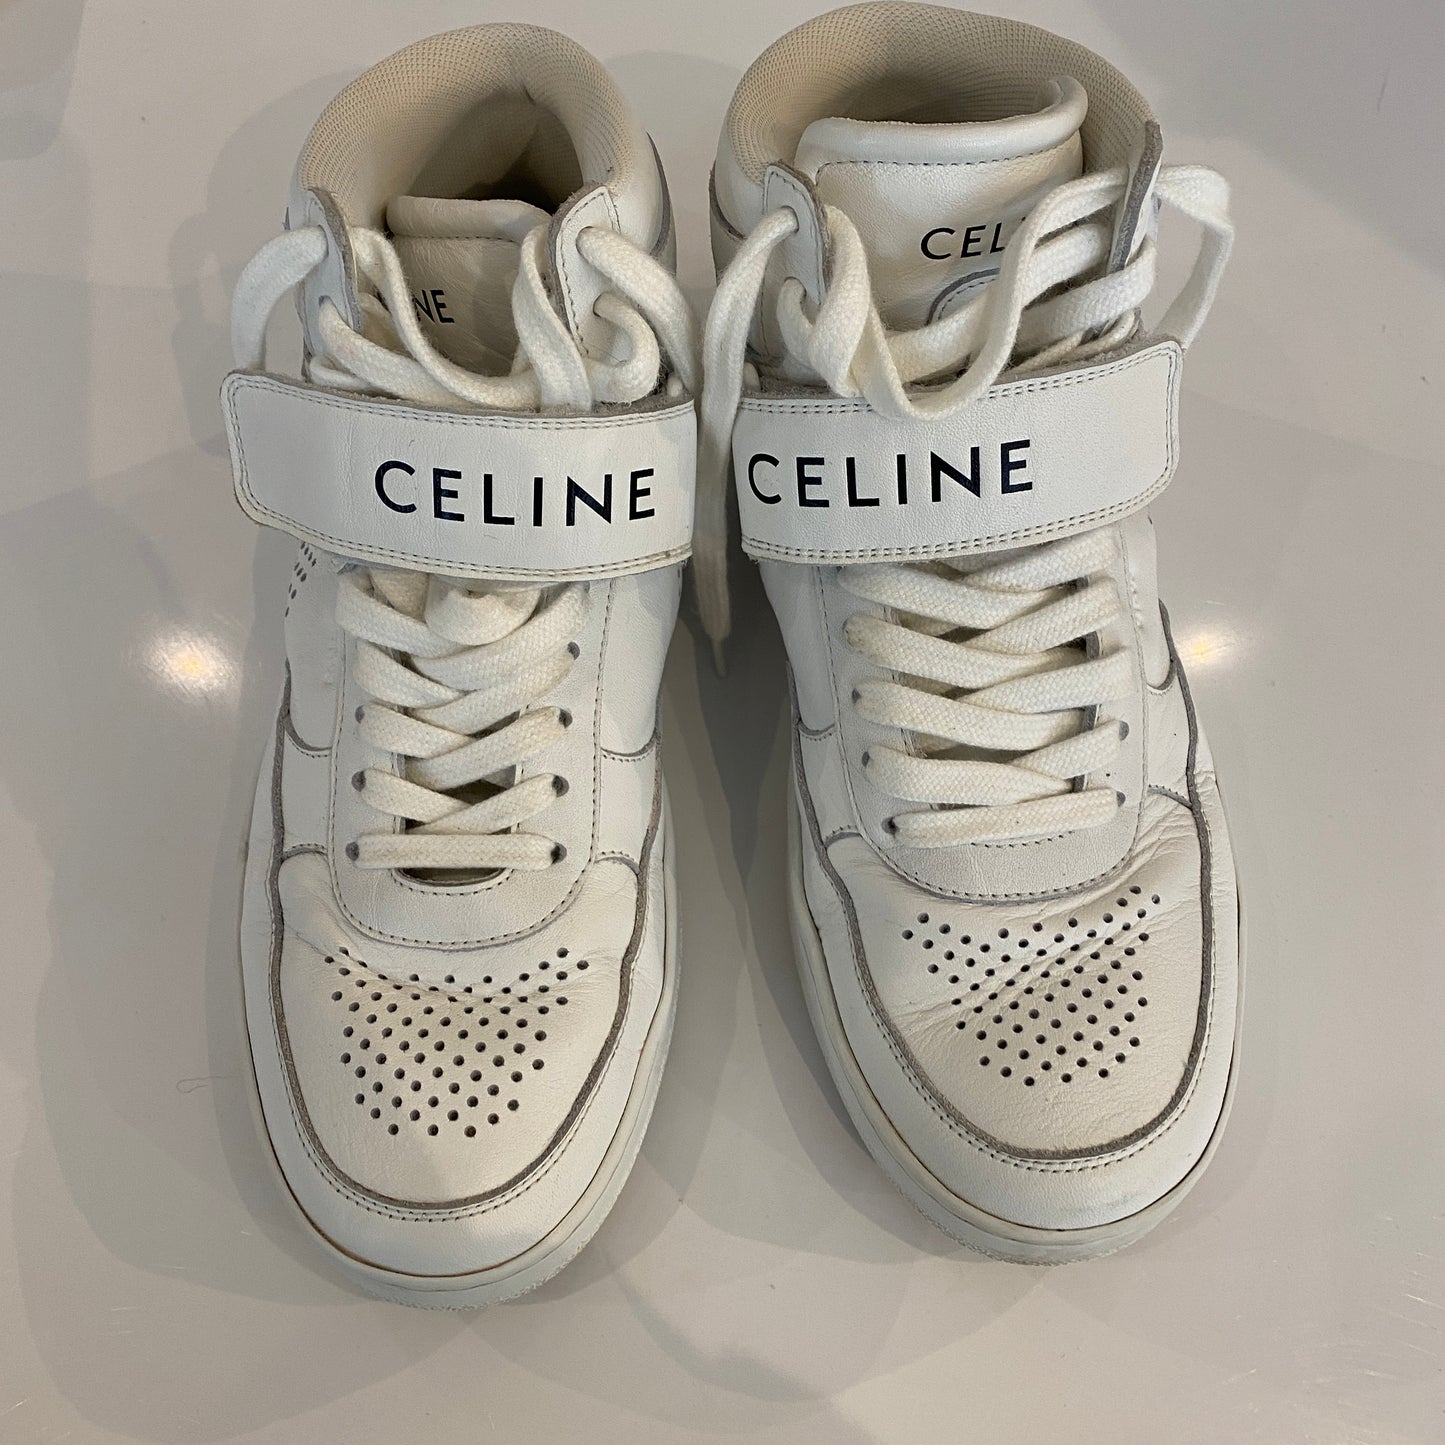 Celine white leather CT-03 high tops size 37 uk 4